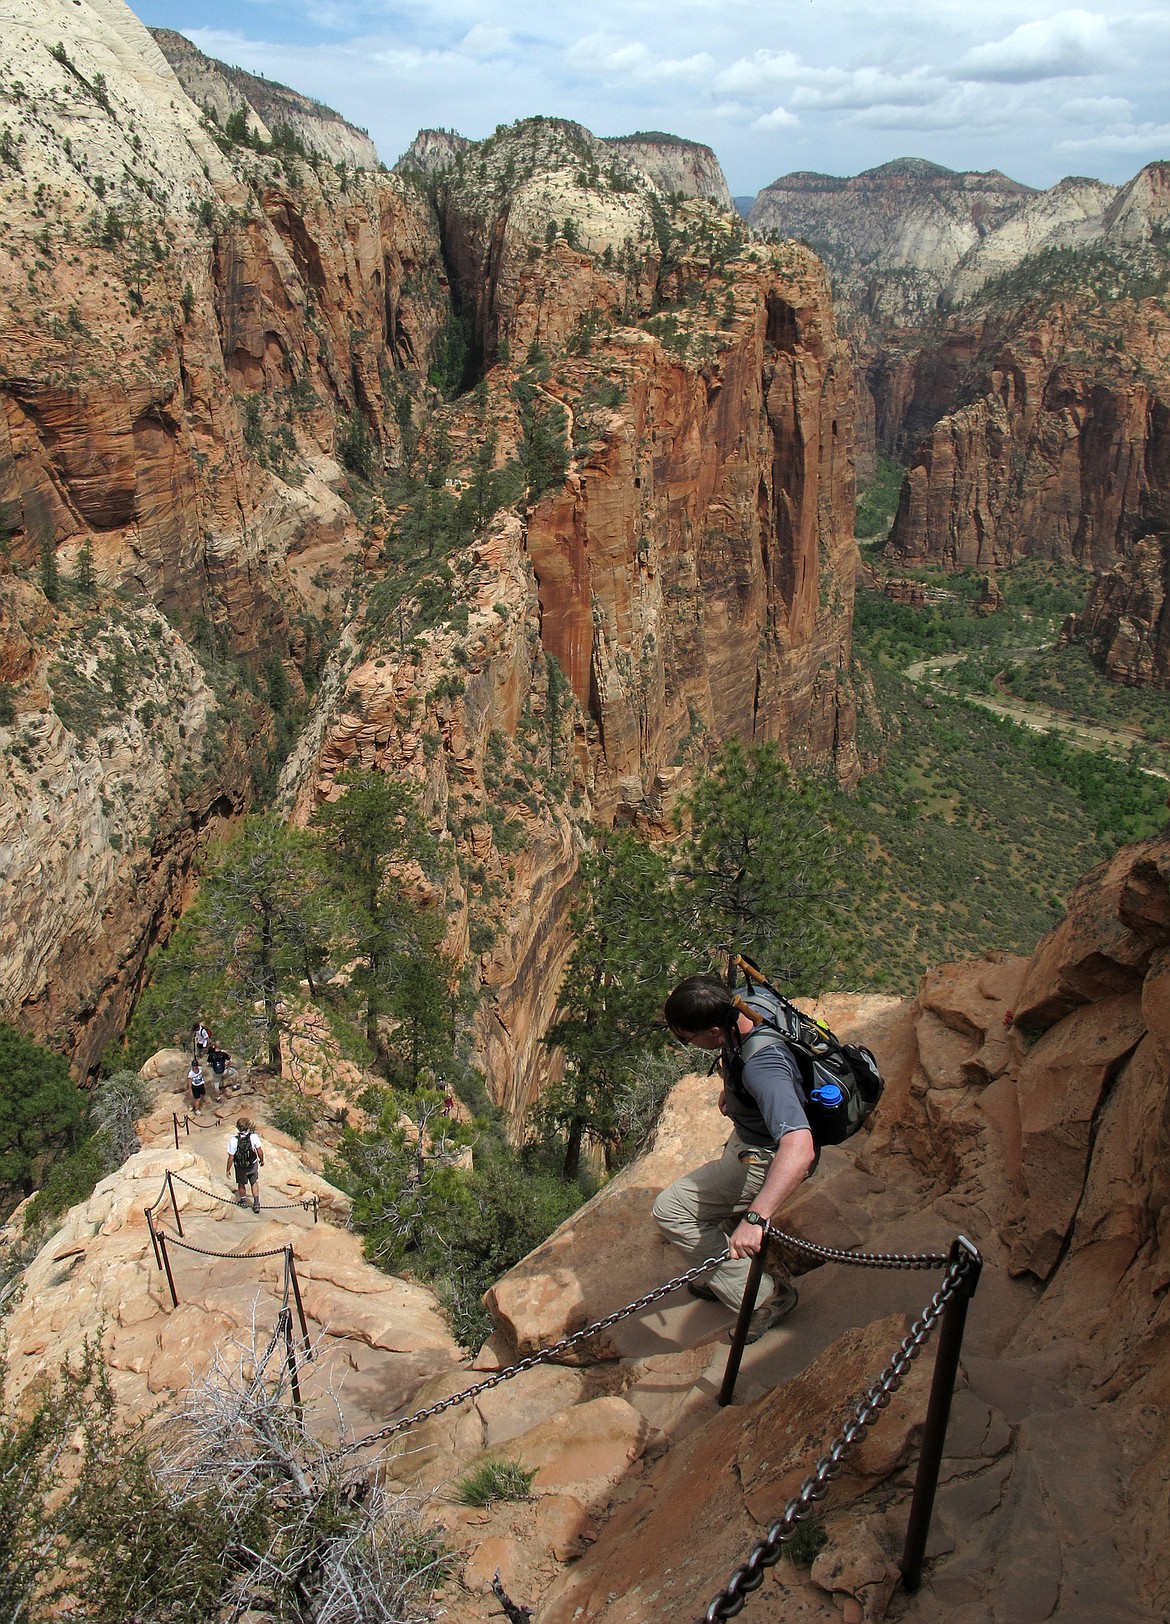 FILE - In this May 8, 2011, file photo, hikers climb down the Angels Landing trail in Zion National Park, in Utah. Zion National Park announced Monday, March 23, 2020, it is closing its campgrounds and part of a popular trail called Angel's Landing that is often crowded with people due to coronavirus. The top part of the hike that is being closed is bordered by steep drops and ascends some 1,500 feet (457 meters) above the southern Utah park's red-rock cliffs, offering sweeping views. (Jud Burkett/The Spectrum via AP, File)